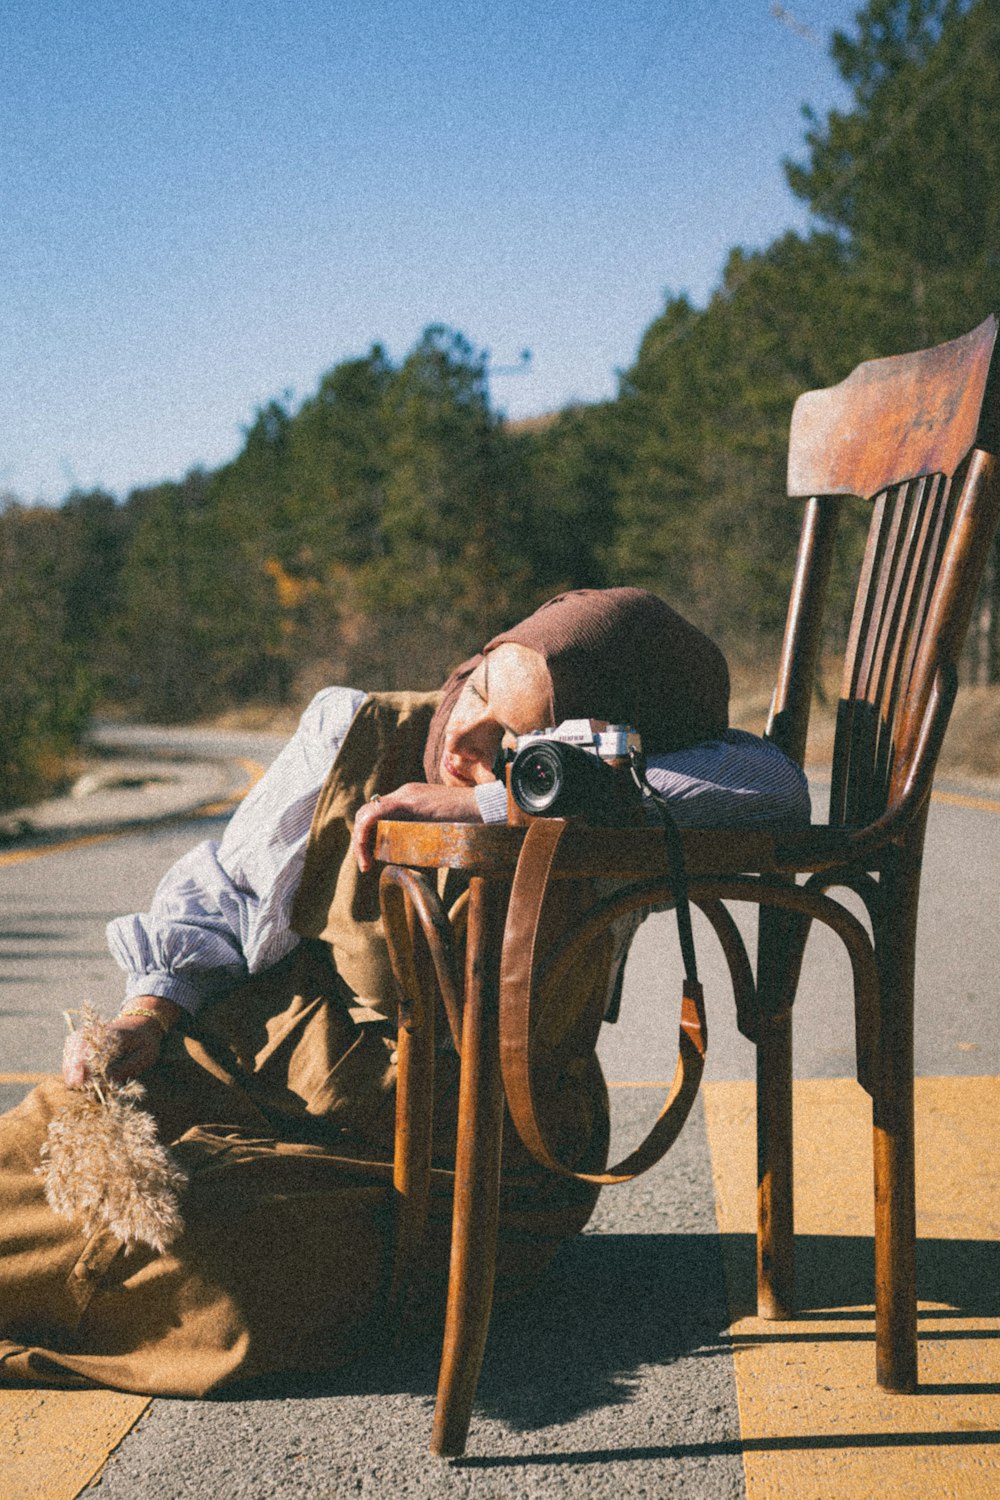 a man laying on the ground next to a wooden chair